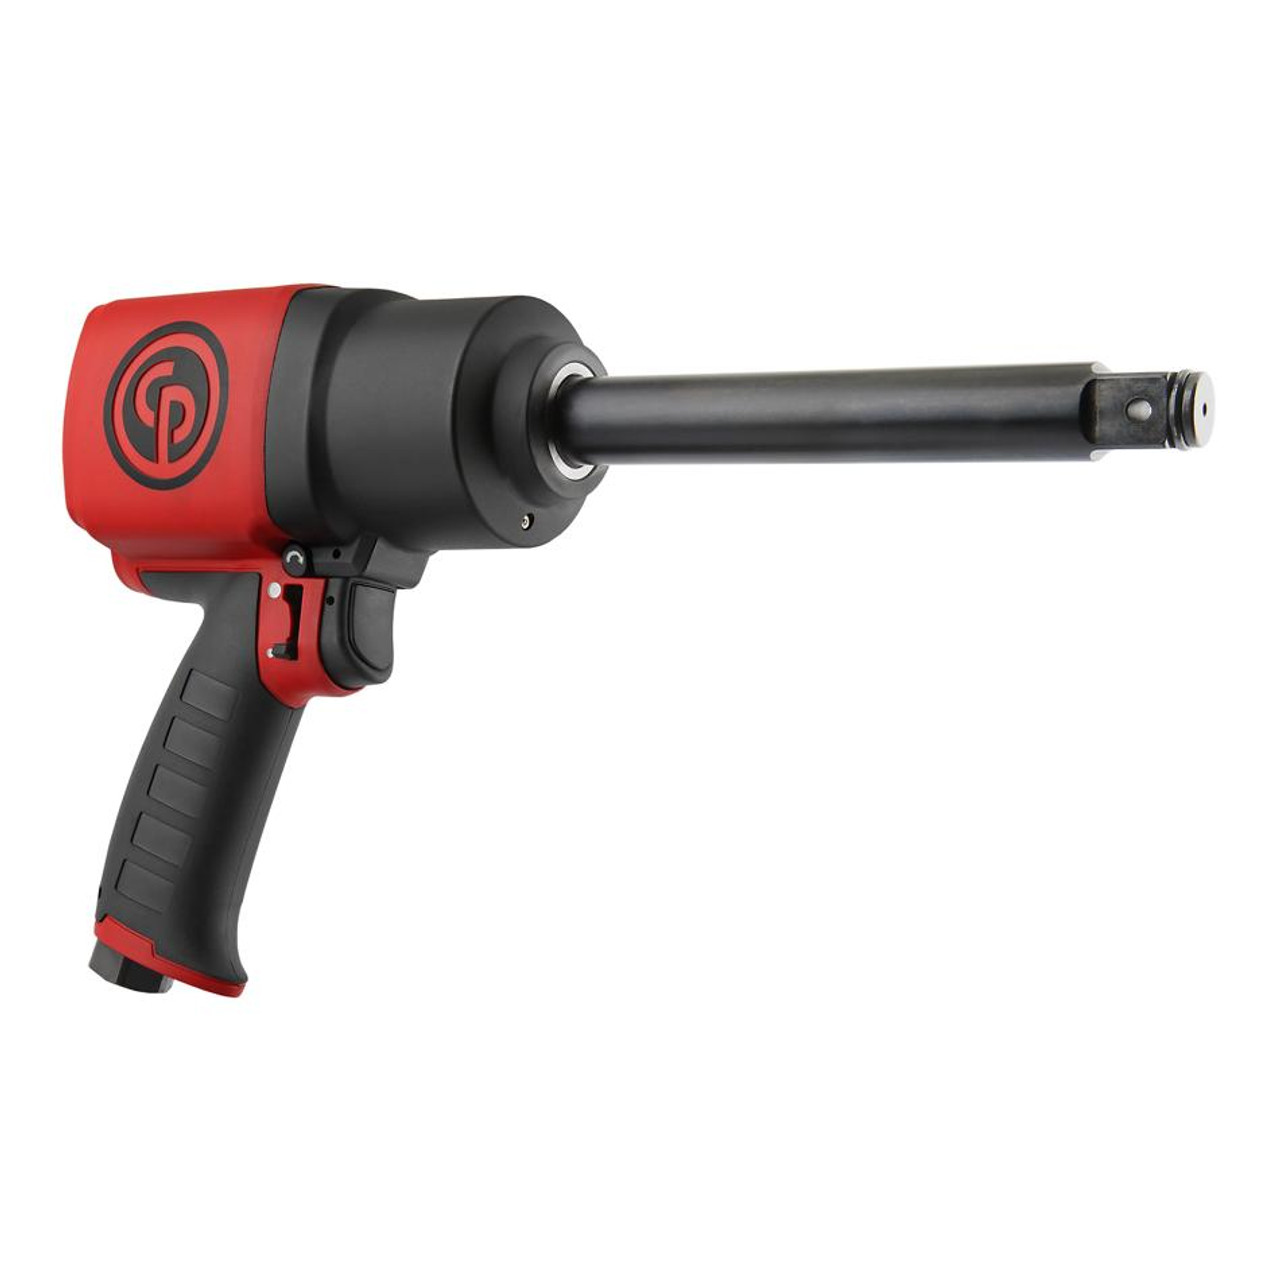 Chicago Pneumatic 3/4" Drv. Impact Wrench with 6" Extended Anvil, Max. Torque 1440ft.lbs/1950Nm (CP7769-6)